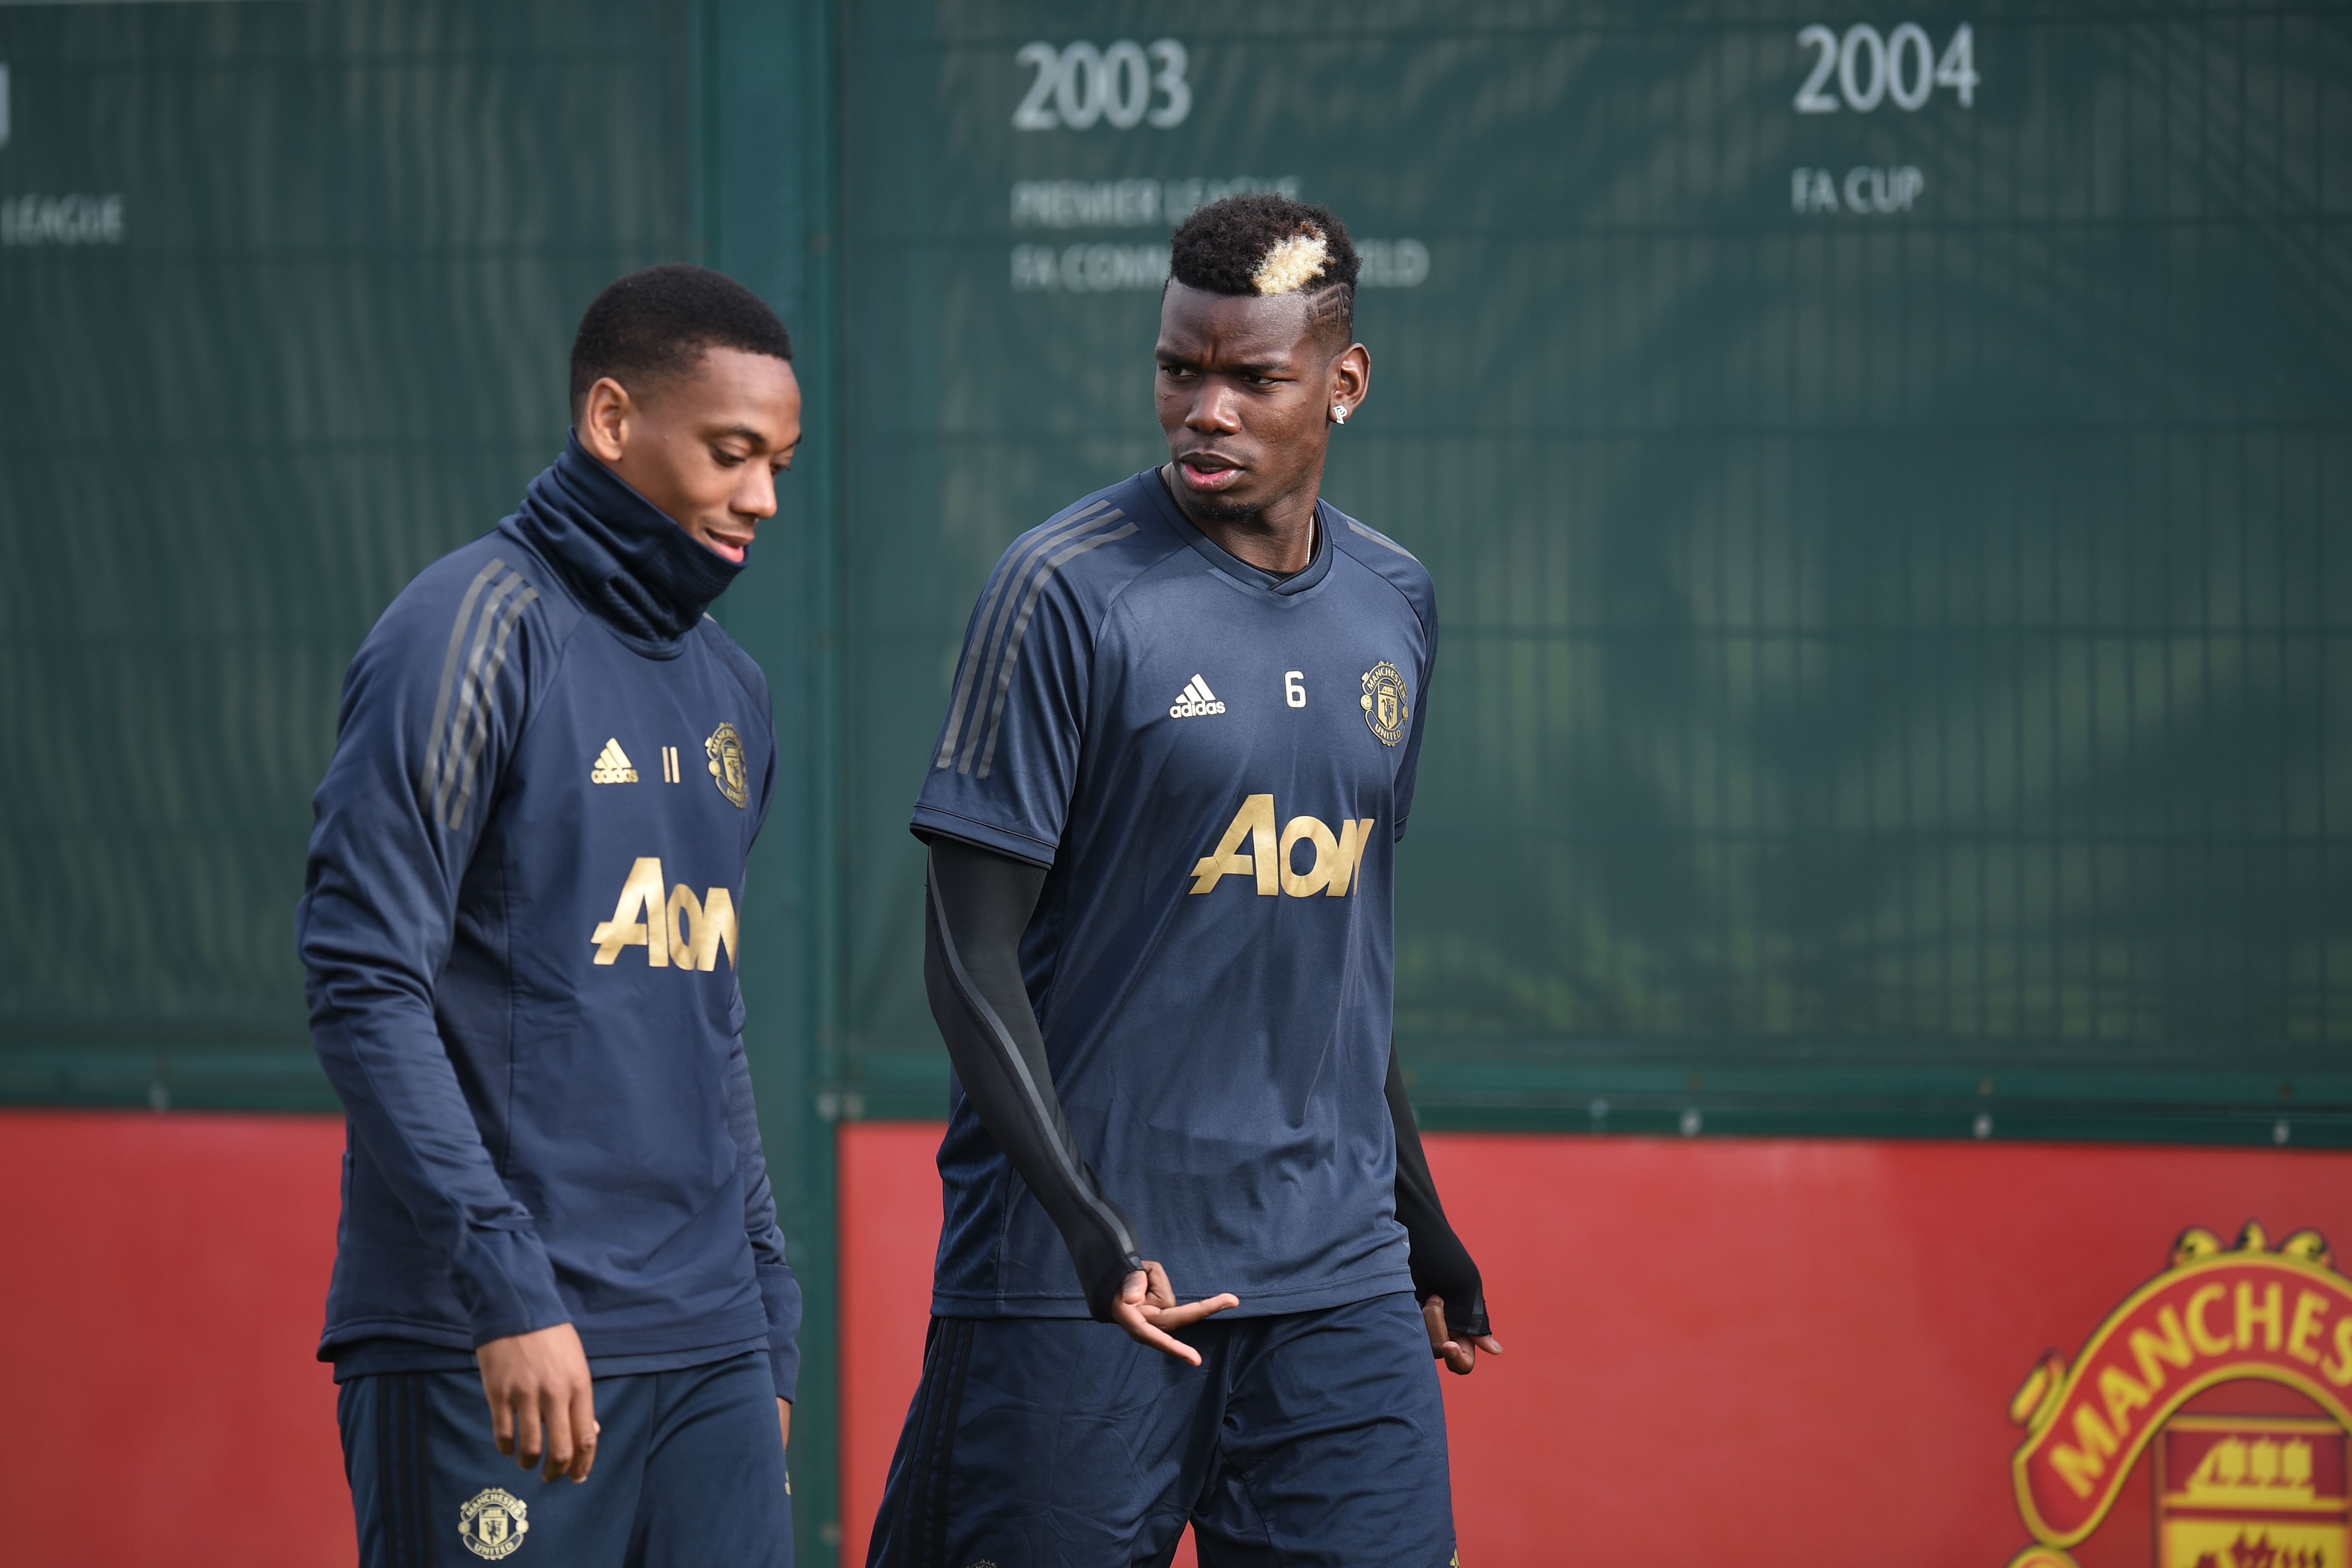 Manchester United's French striker Anthony Martial (L) and Manchester United's French midfielder Paul Pogba (R) arrive for a training session at the Carrington Training complex in Manchester, north west England on October 22, 2018, ahead of their UEFA Champions League group H football match against Juventus on October 23. (Photo by Oli SCARFF / AFP)        (Photo credit should read OLI SCARFF/AFP/Getty Images)